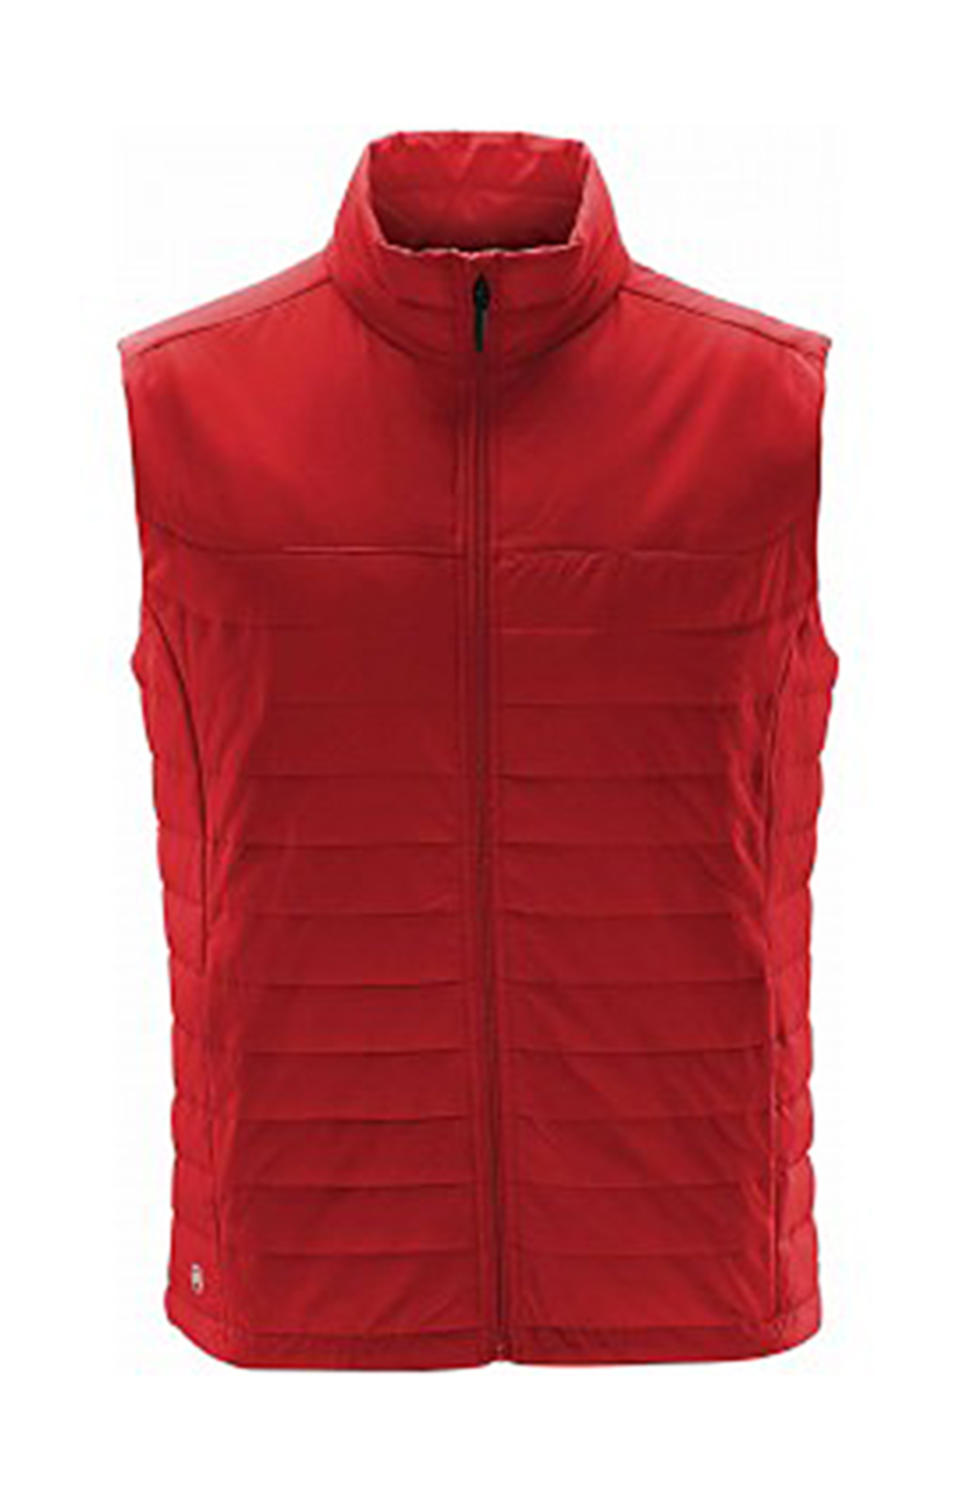  Nautilus Thermal Bodywarmer in Farbe Bright Red